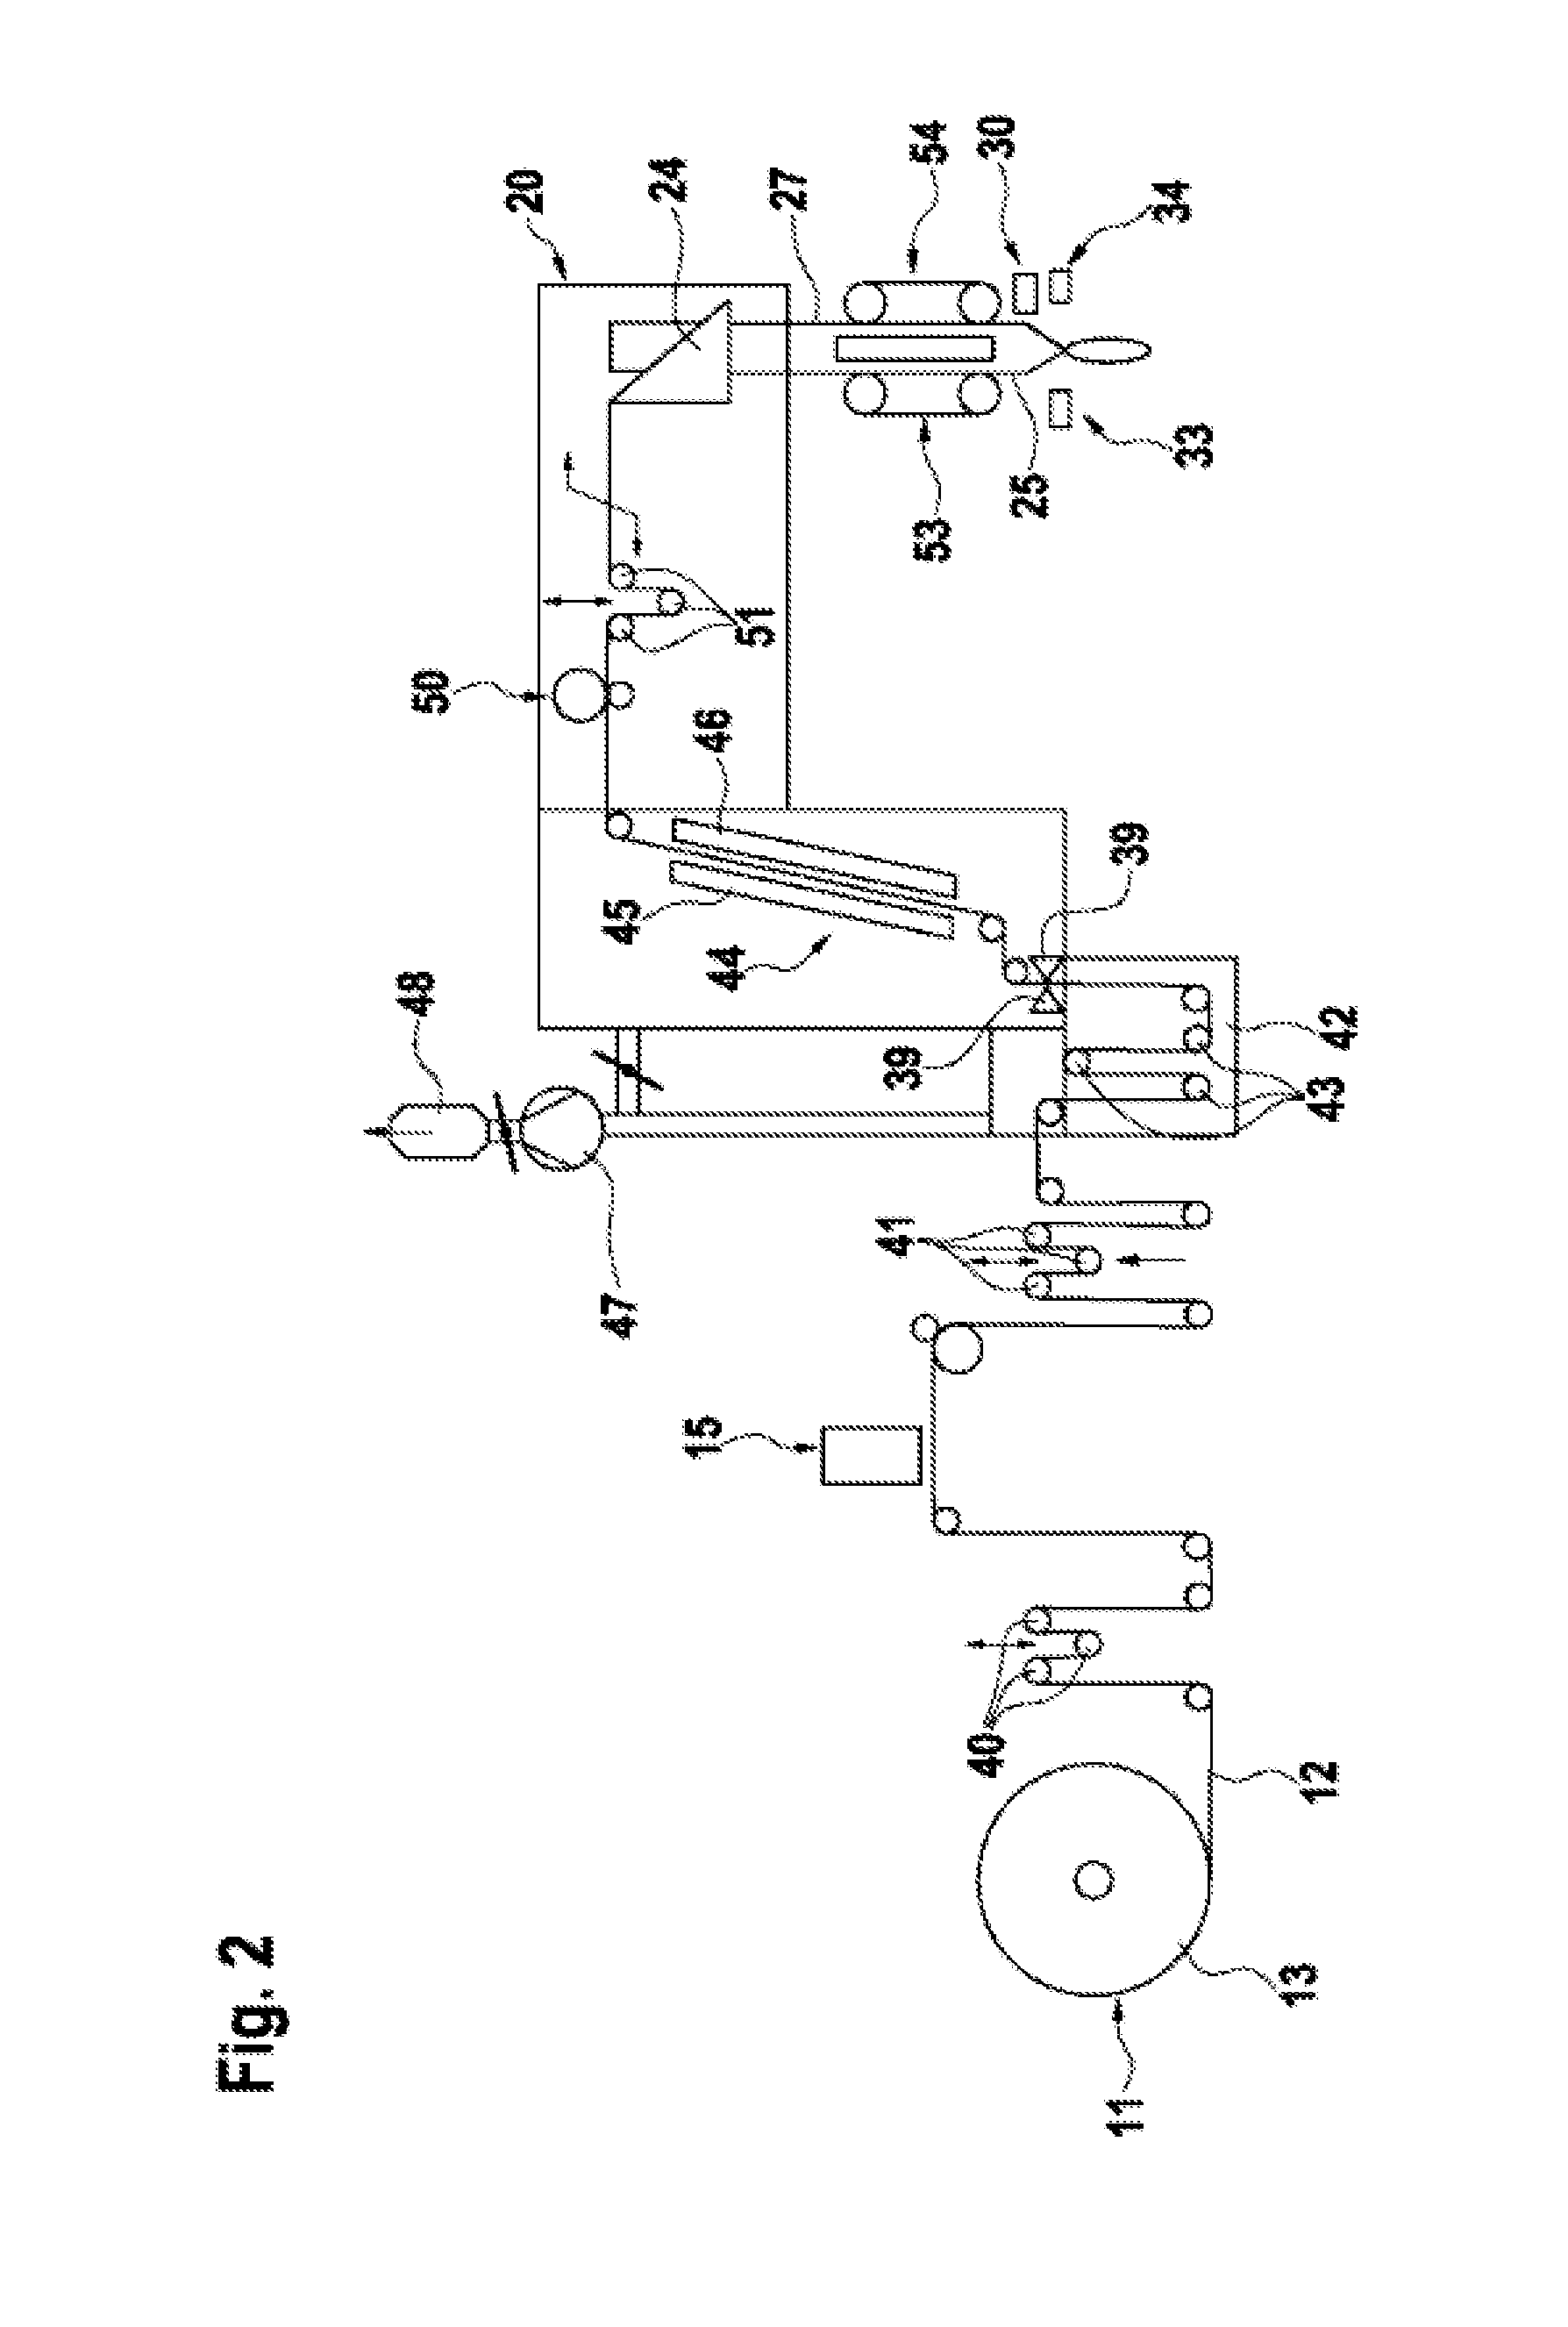 Apparatus and method for forming, filling and sealing packaging containers each comprising one pouring device